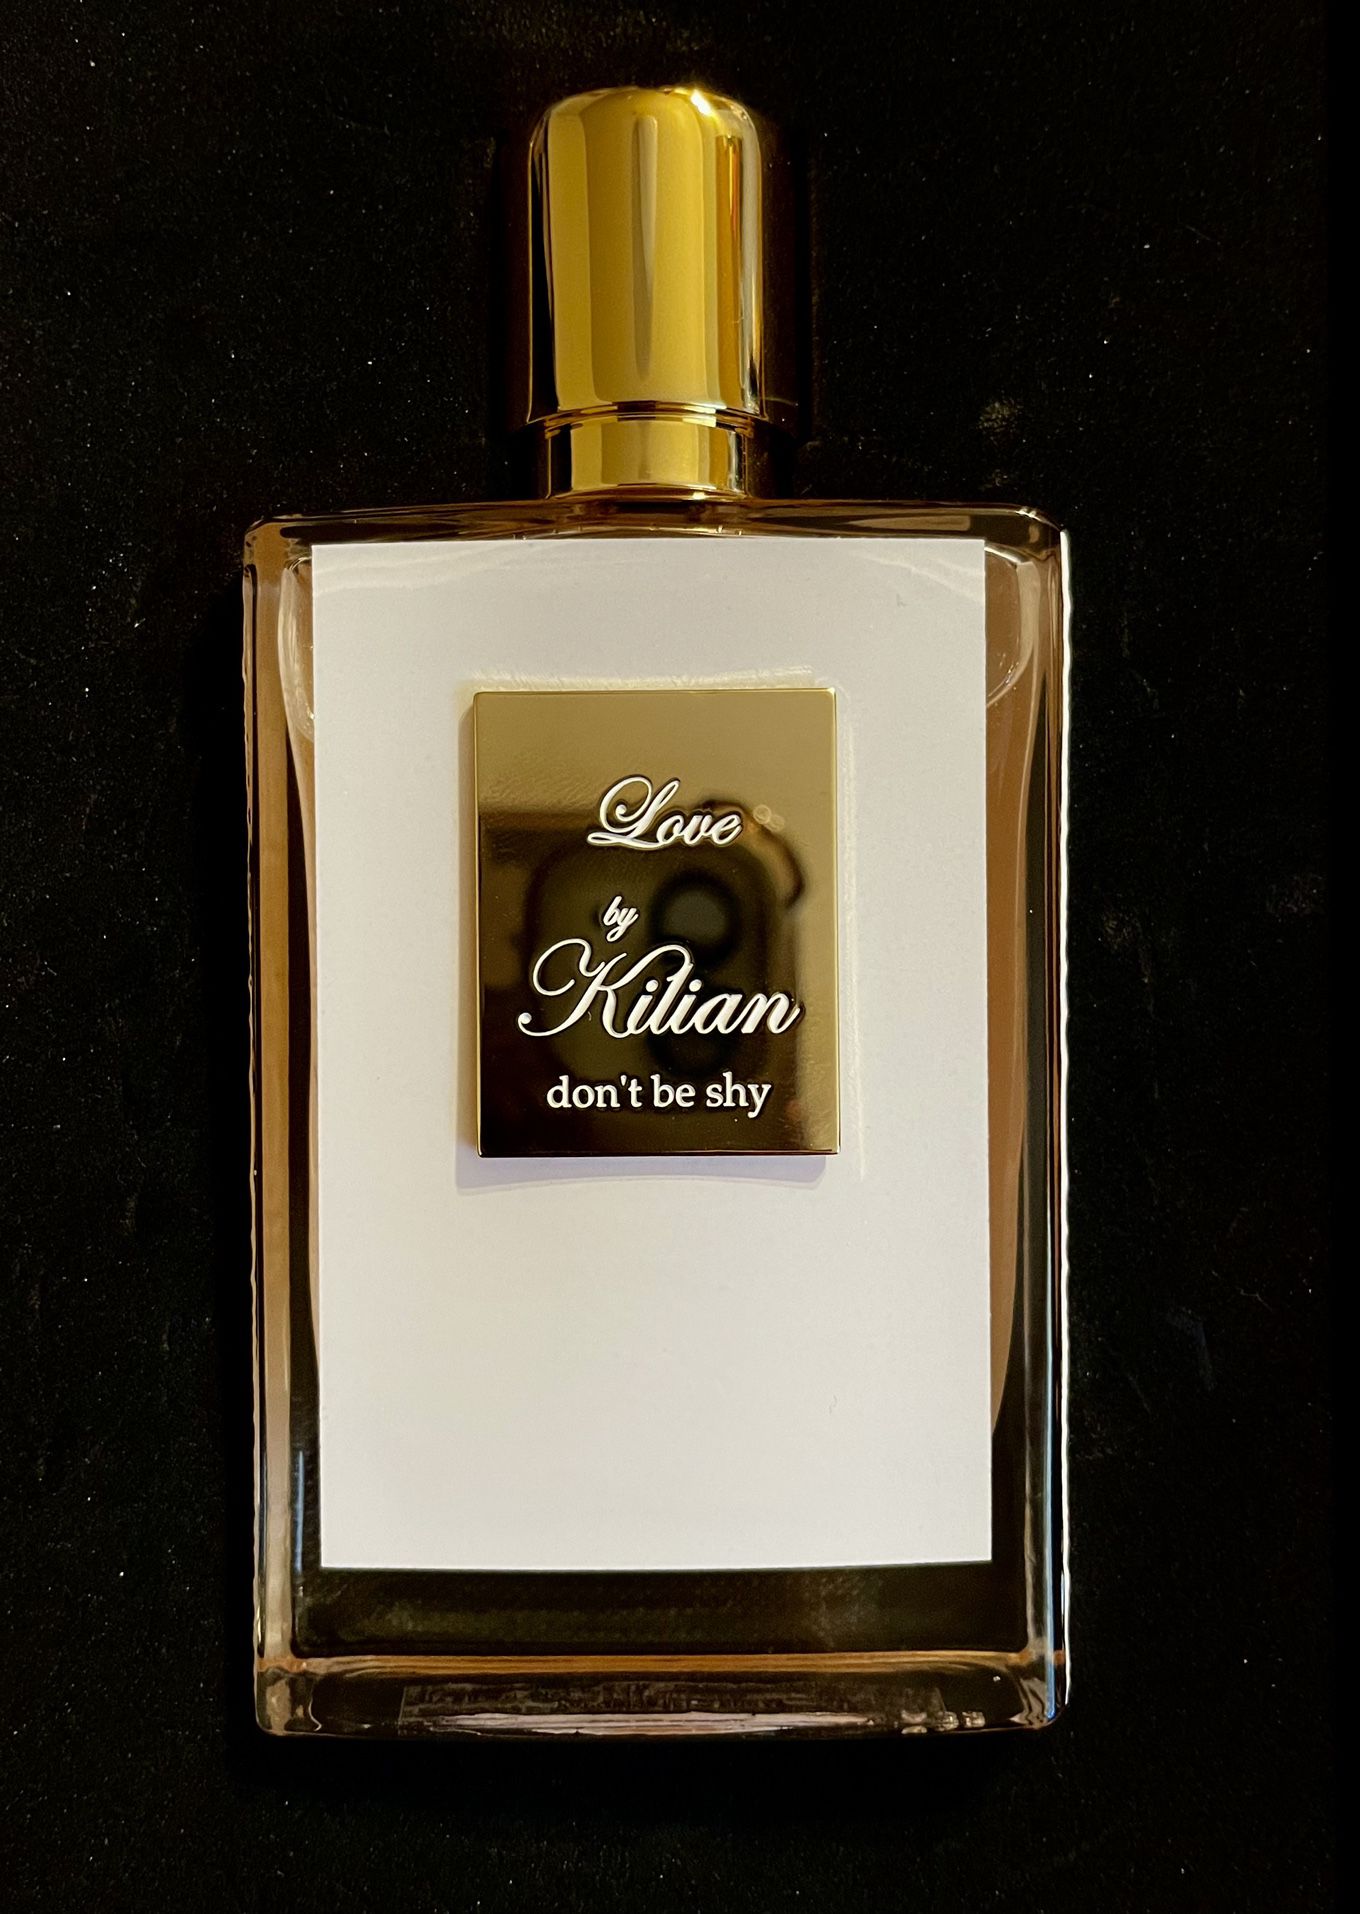 Love, don't be shy Eau de Parfum, 1.7 oz. - Limited 15-Year Anniversary  Holiday Edition